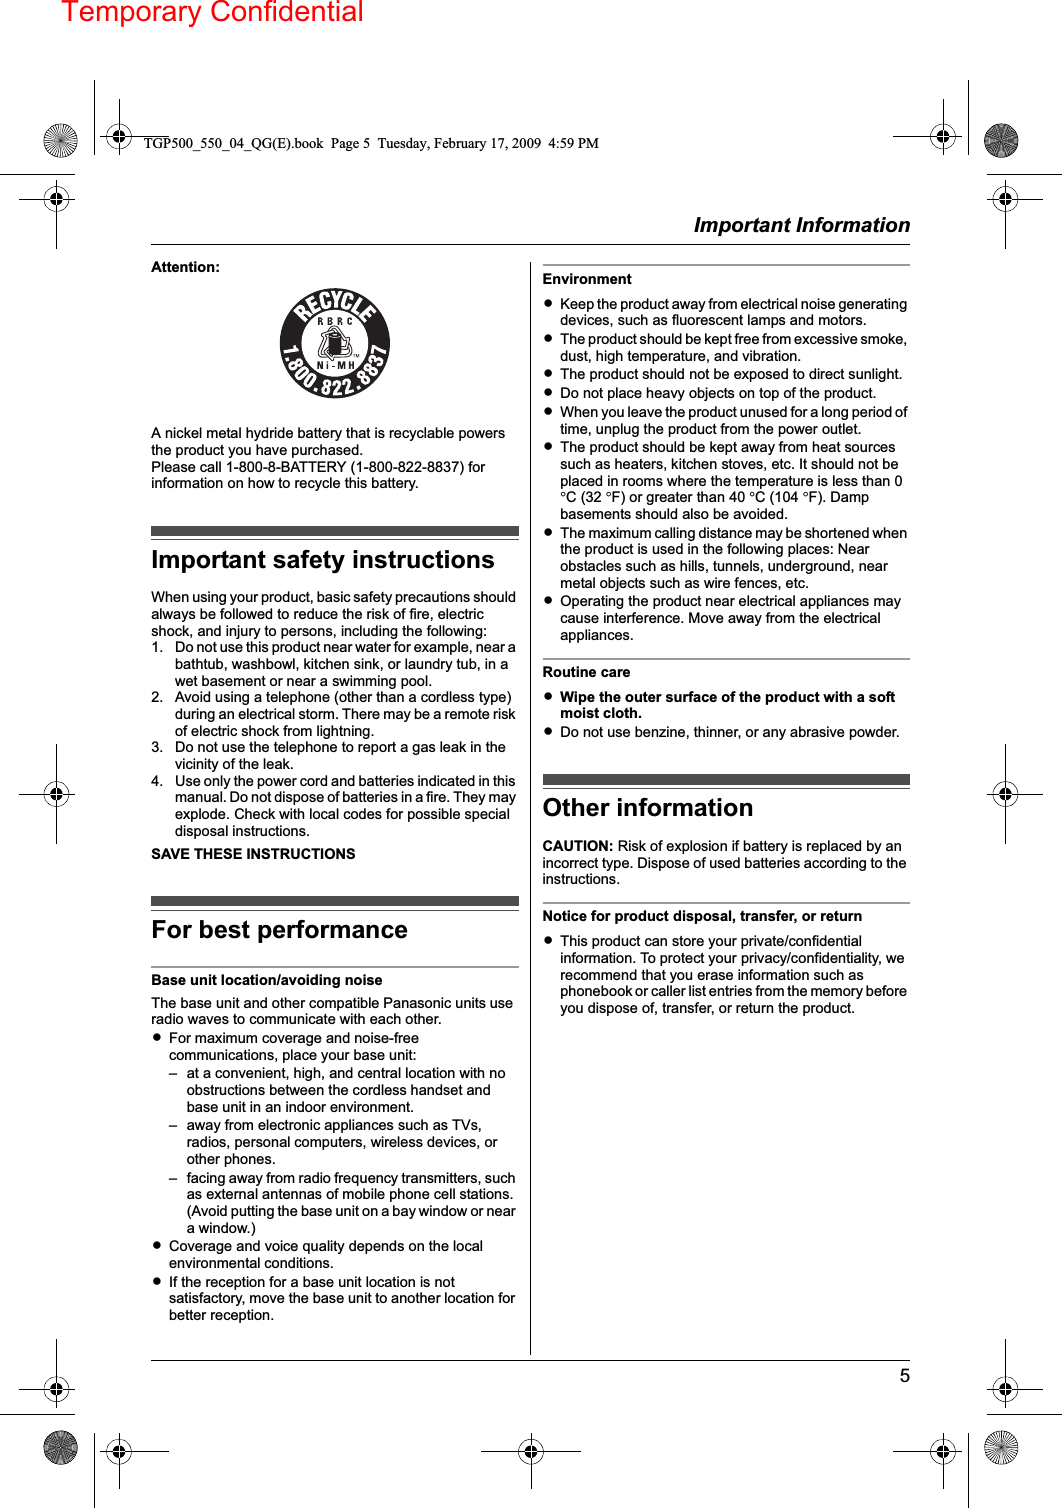 Temporary ConfidentialImportant Information5Attention:A nickel metal hydride battery that is recyclable powers the product you have purchased.Please call 1-800-8-BATTERY (1-800-822-8837) for information on how to recycle this battery.Important safety instructionsWhen using your product, basic safety precautions should always be followed to reduce the risk of fire, electric shock, and injury to persons, including the following:1. Do not use this product near water for example, near a bathtub, washbowl, kitchen sink, or laundry tub, in a wet basement or near a swimming pool.2. Avoid using a telephone (other than a cordless type) during an electrical storm. There may be a remote risk of electric shock from lightning.3. Do not use the telephone to report a gas leak in the vicinity of the leak.4. Use only the power cord and batteries indicated in this manual. Do not dispose of batteries in a fire. They may explode. Check with local codes for possible special disposal instructions.SAVE THESE INSTRUCTIONSFor best performanceBase unit location/avoiding noiseThe base unit and other compatible Panasonic units use radio waves to communicate with each other.LFor maximum coverage and noise-free communications, place your base unit:– at a convenient, high, and central location with no obstructions between the cordless handset and base unit in an indoor environment.– away from electronic appliances such as TVs, radios, personal computers, wireless devices, or other phones.– facing away from radio frequency transmitters, such as external antennas of mobile phone cell stations. (Avoid putting the base unit on a bay window or near a window.)LCoverage and voice quality depends on the local environmental conditions.LIf the reception for a base unit location is not satisfactory, move the base unit to another location for better reception.EnvironmentLKeep the product away from electrical noise generating devices, such as fluorescent lamps and motors.LThe product should be kept free from excessive smoke, dust, high temperature, and vibration.LThe product should not be exposed to direct sunlight.LDo not place heavy objects on top of the product.LWhen you leave the product unused for a long period of time, unplug the product from the power outlet.LThe product should be kept away from heat sources such as heaters, kitchen stoves, etc. It should not be placed in rooms where the temperature is less than 0 °C (32 °F) or greater than 40 °C (104 °F). Damp basements should also be avoided.LThe maximum calling distance may be shortened when the product is used in the following places: Near obstacles such as hills, tunnels, underground, near metal objects such as wire fences, etc.LOperating the product near electrical appliances may cause interference. Move away from the electrical appliances.Routine careLWipe the outer surface of the product with a soft moist cloth.LDo not use benzine, thinner, or any abrasive powder.Other informationCAUTION: Risk of explosion if battery is replaced by an incorrect type. Dispose of used batteries according to the instructions.Notice for product disposal, transfer, or returnLThis product can store your private/confidential information. To protect your privacy/confidentiality, we recommend that you erase information such as phonebook or caller list entries from the memory before you dispose of, transfer, or return the product.TGP500_550_04_QG(E).book  Page 5  Tuesday, February 17, 2009  4:59 PM